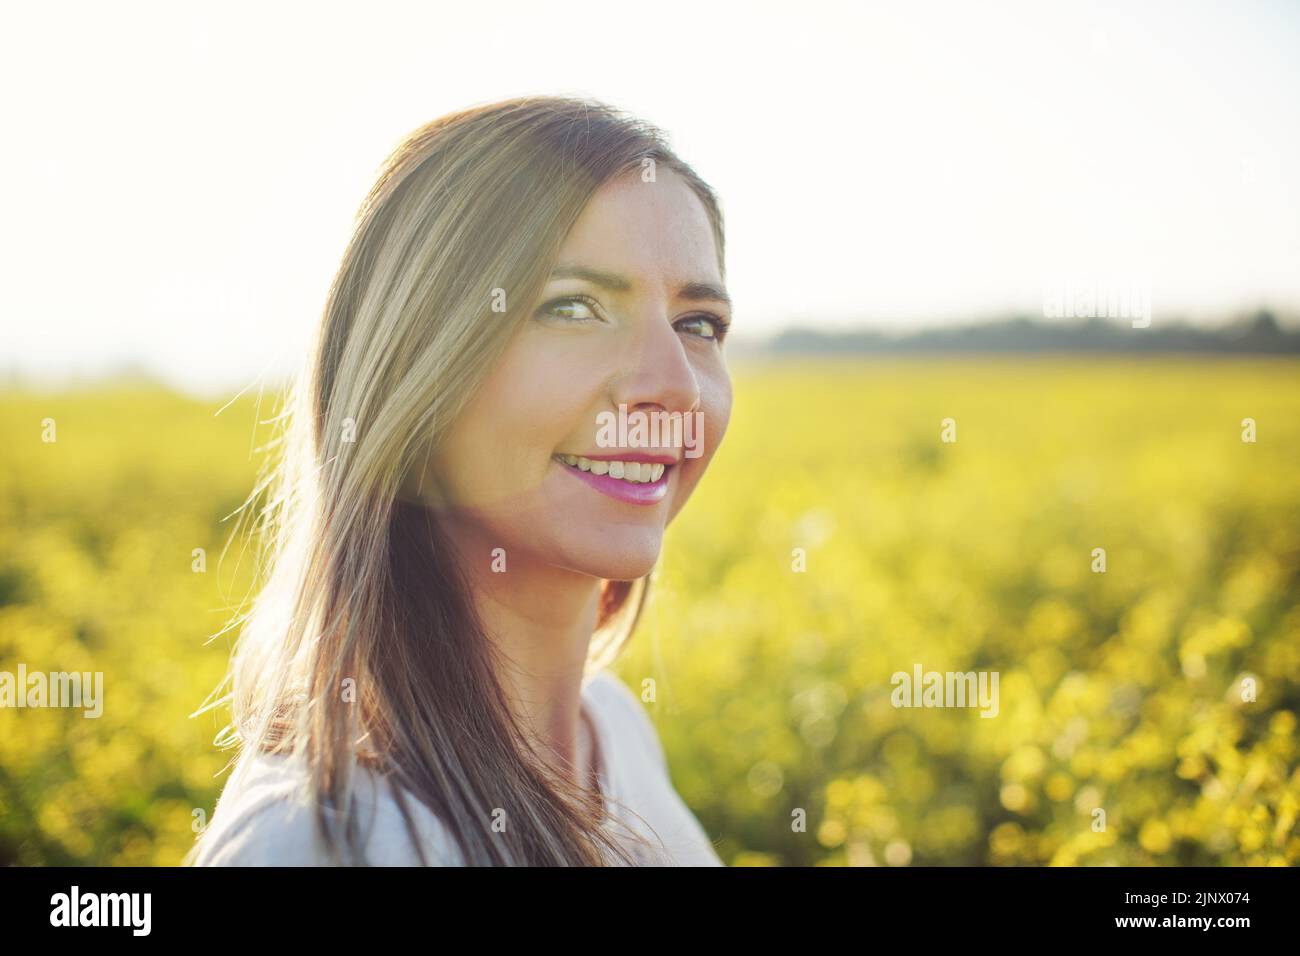 Portrait of young woman with long hair, yellow flower field and sun backlight behind her Stock Photo